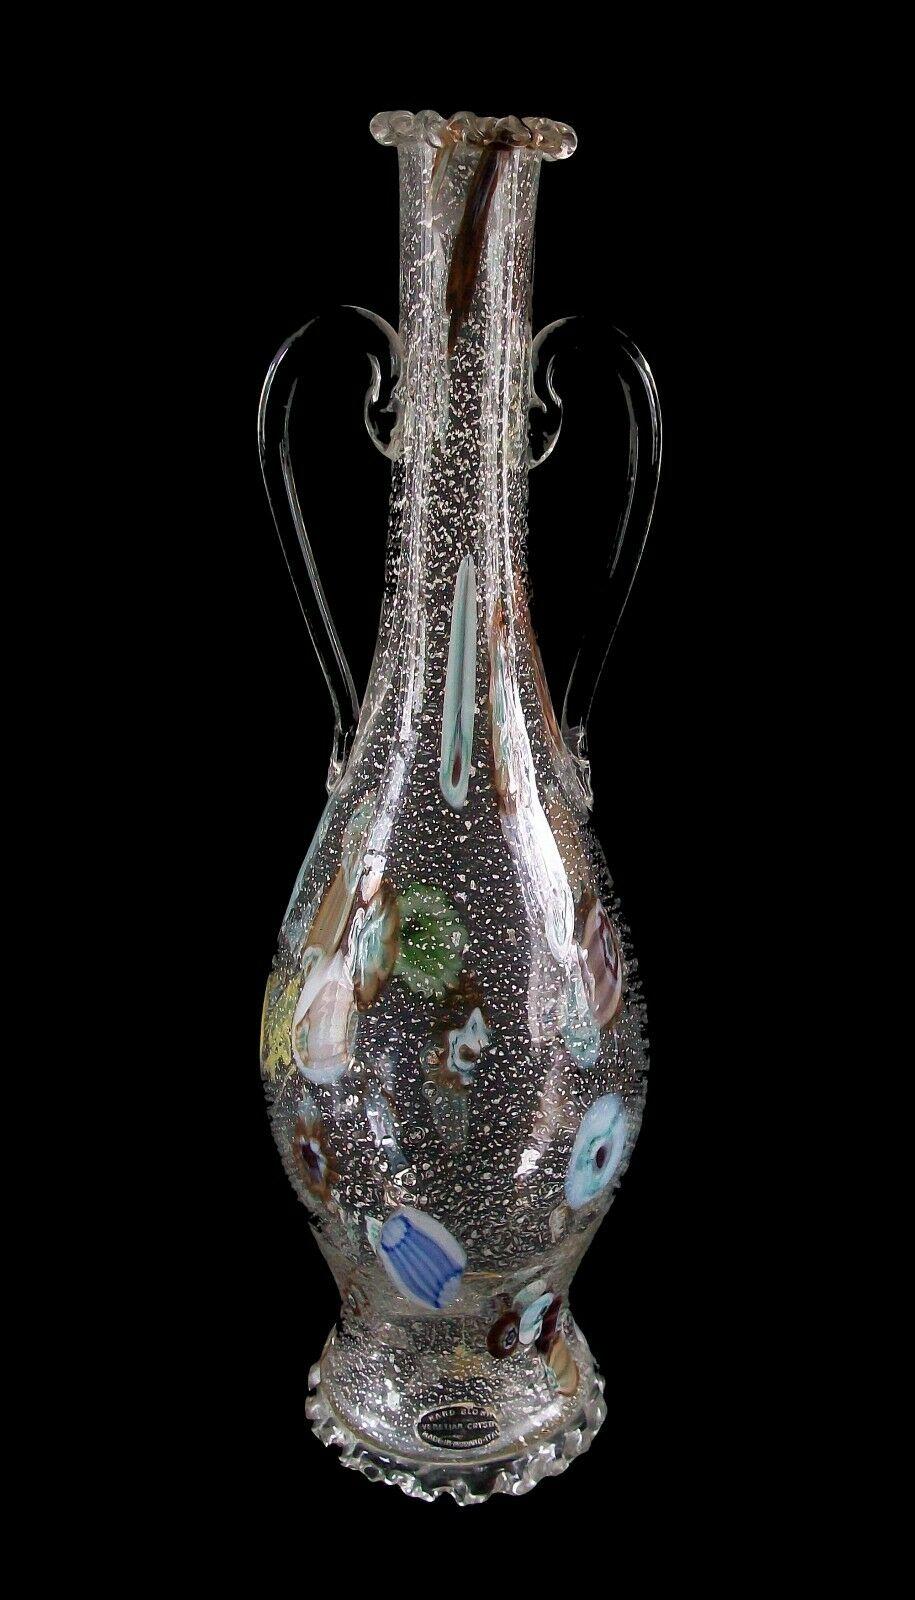 FRATELLI TOSO (Attributed) - Early Venetian crystal 'Roman style' decanter - fine European quality - hand blown with silver flecks and large millefiori murrines - clear glass handles - original foil label still attached - Italy (Murano) - circa